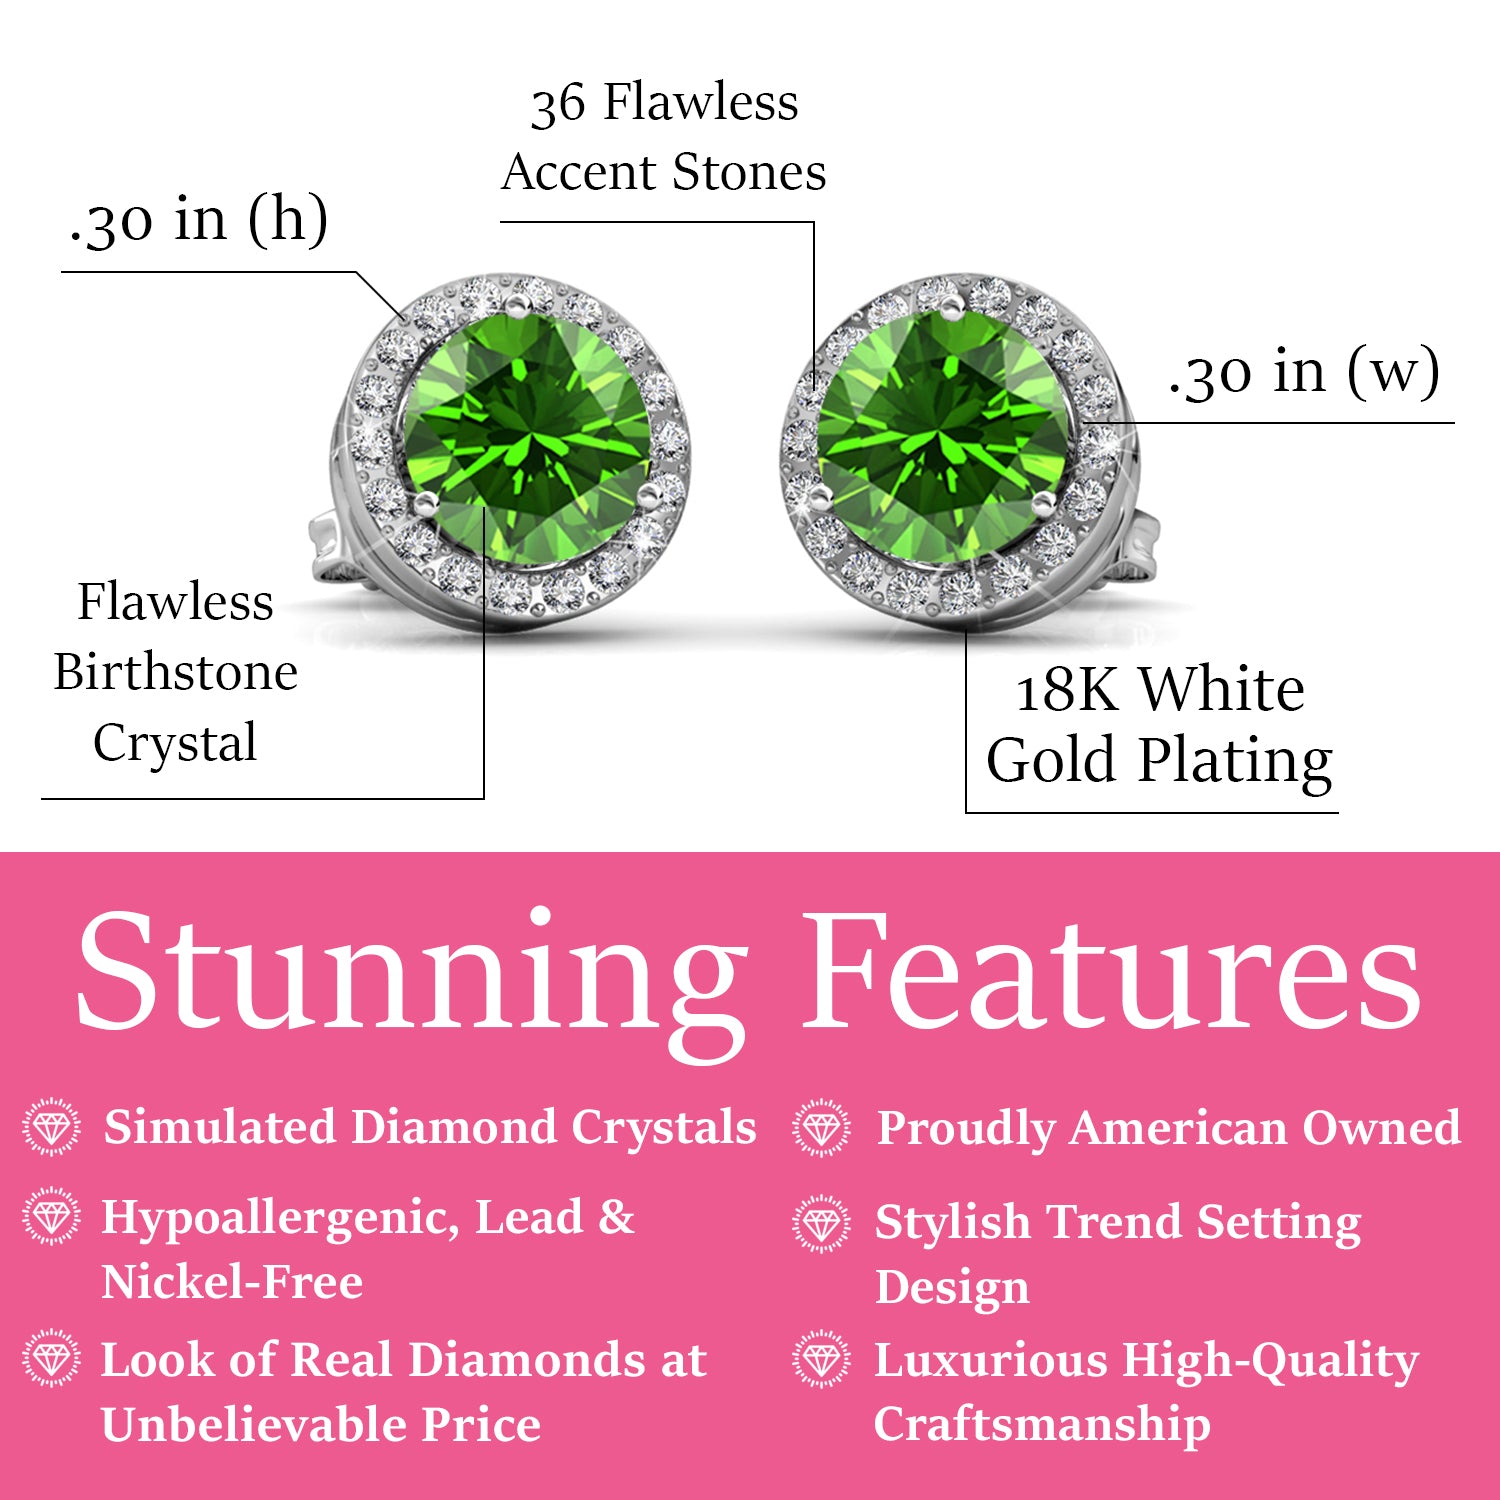 Royal August Birthstone Peridot Earrings, 18k White Gold Plated Silver Halo Earrings with Round Cut Crystals